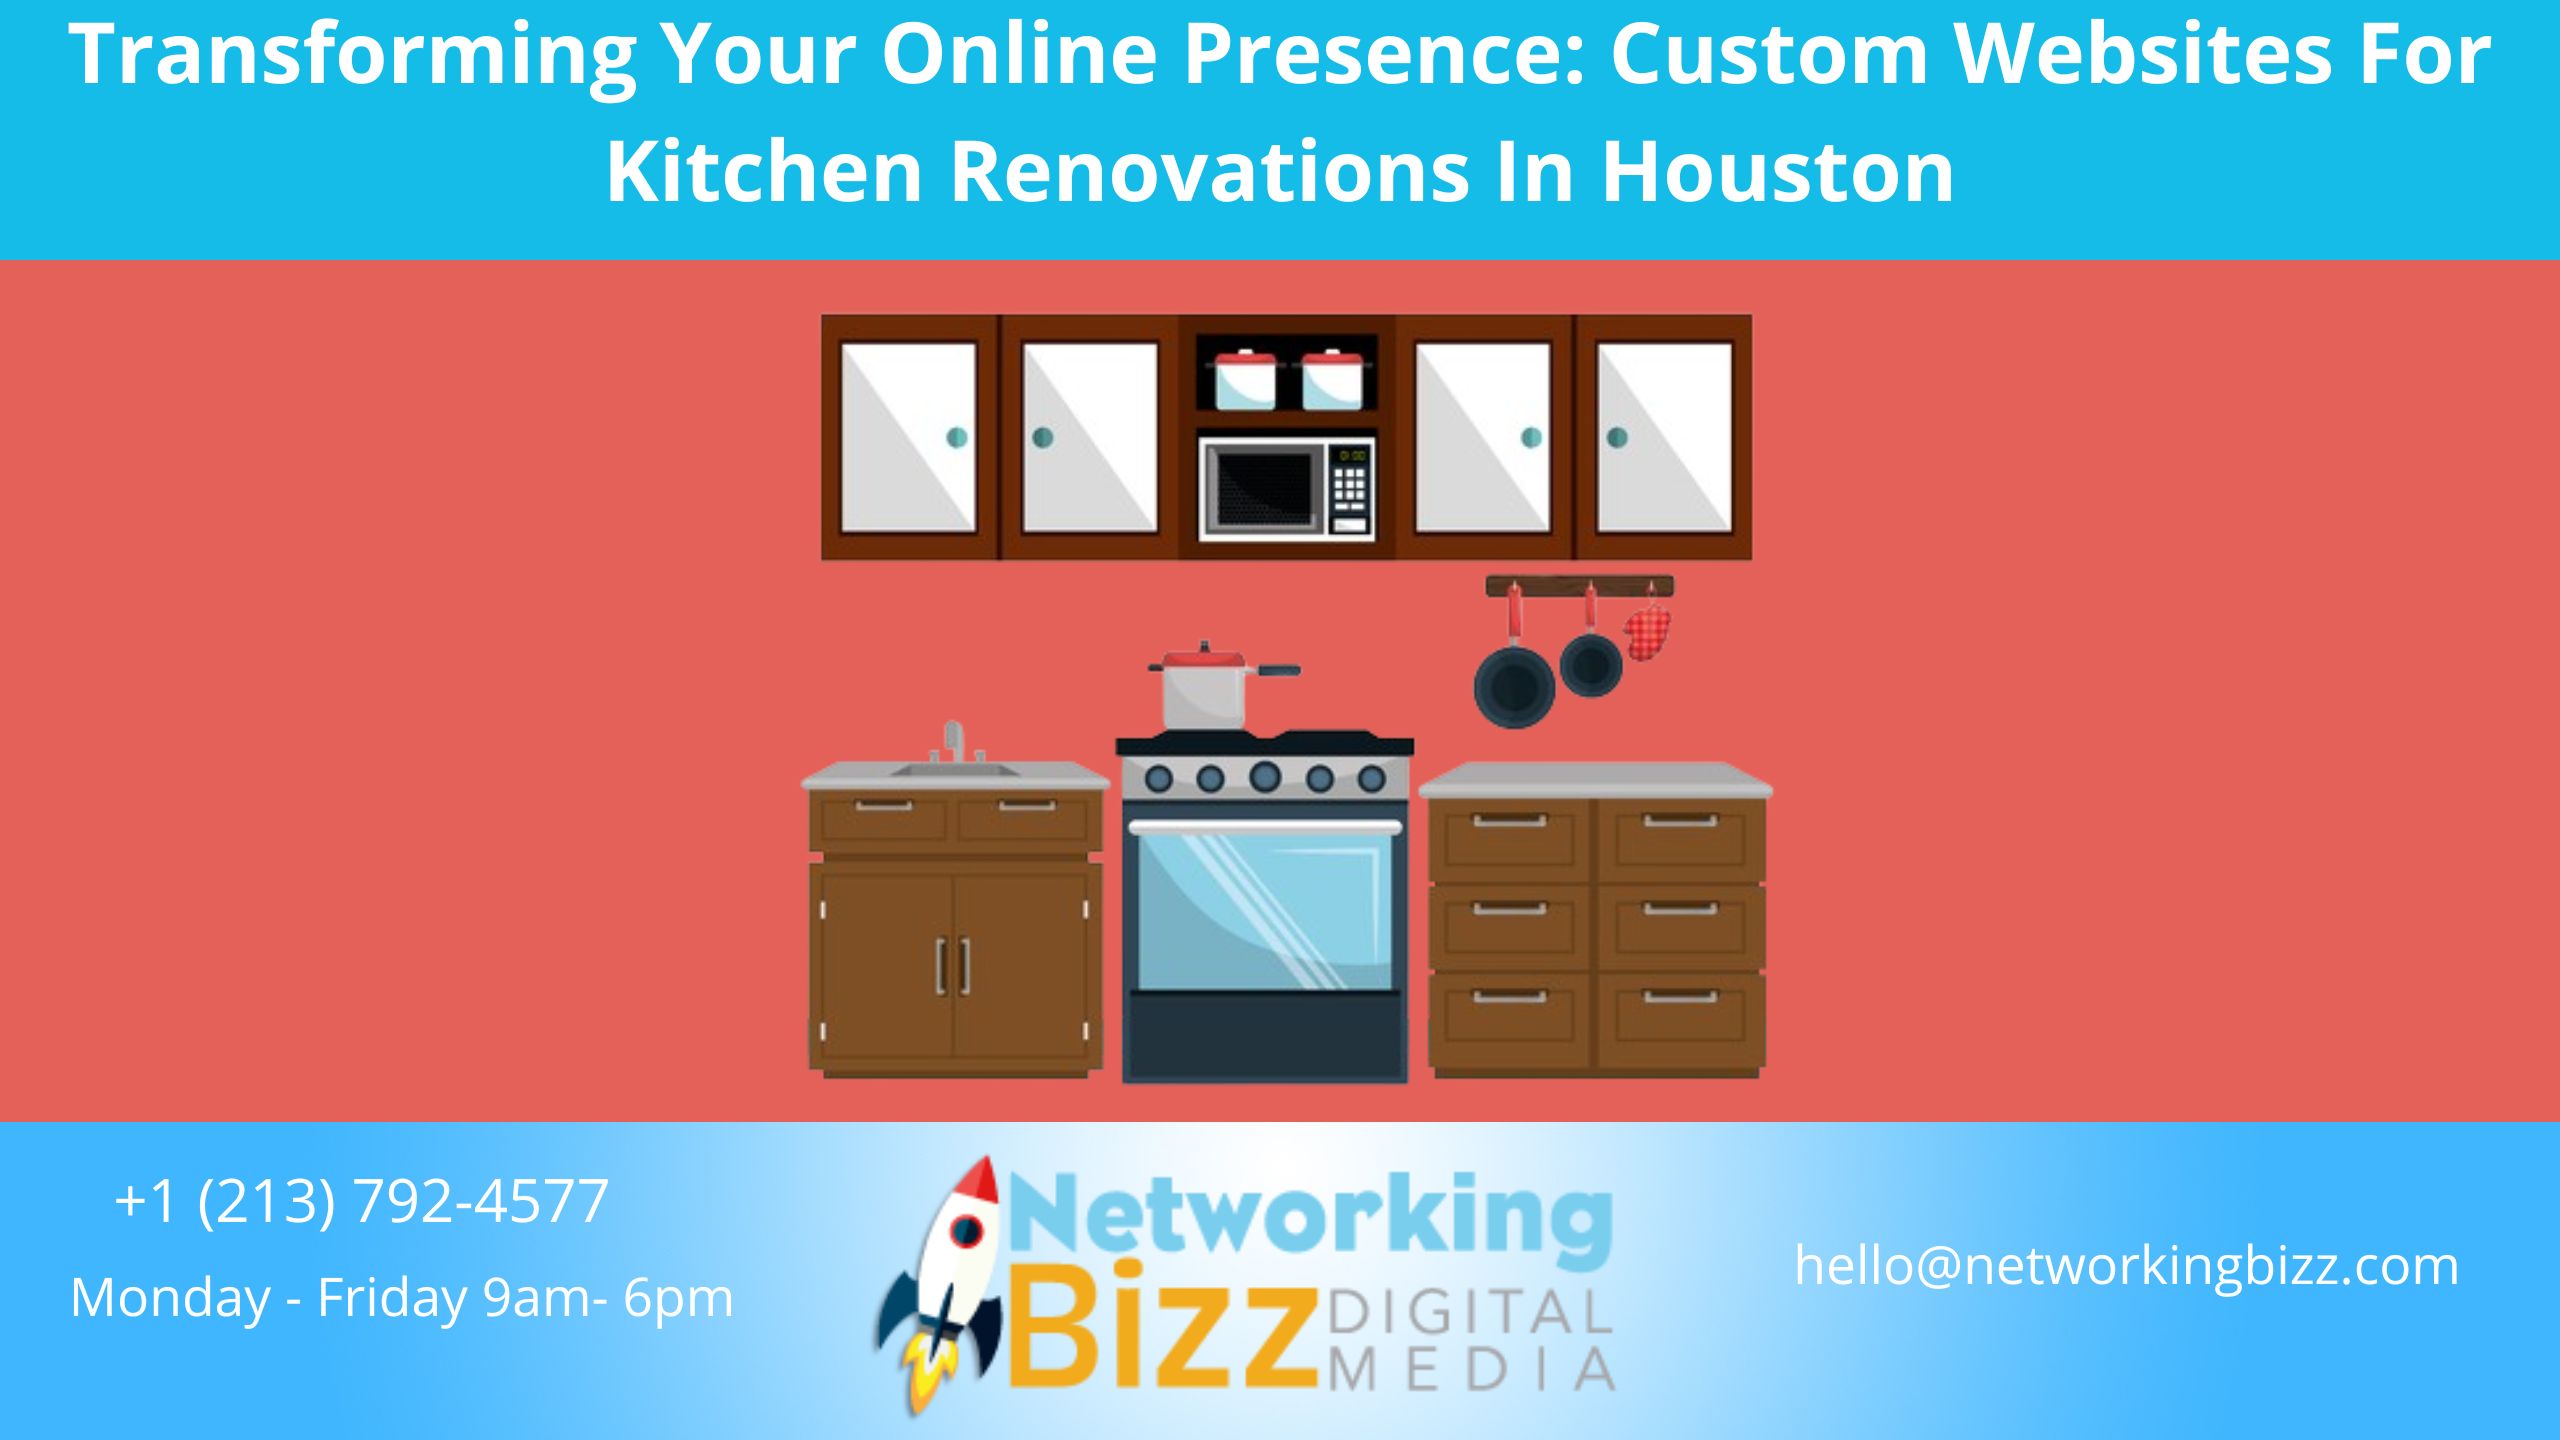 Transforming Your Online Presence: Custom Websites For Kitchen Renovations In Houston